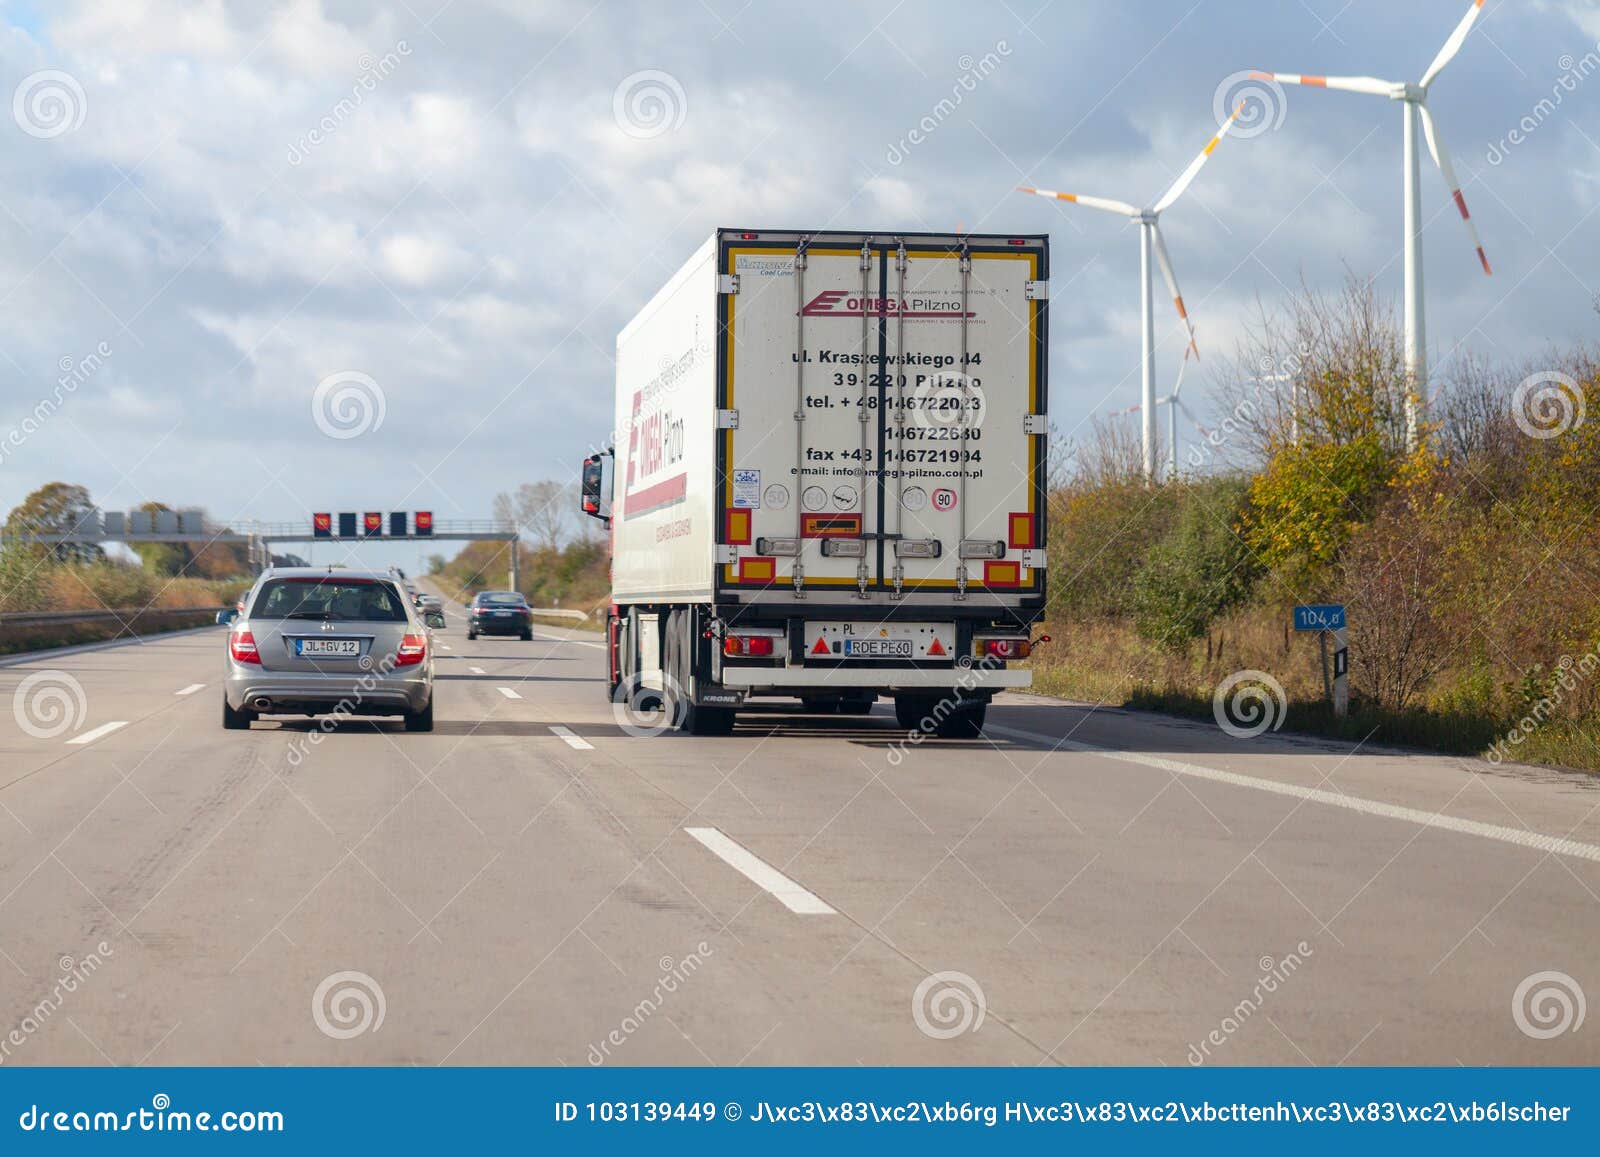 Truck From Polish Forwarder Omega Pilzno Drives On German ...